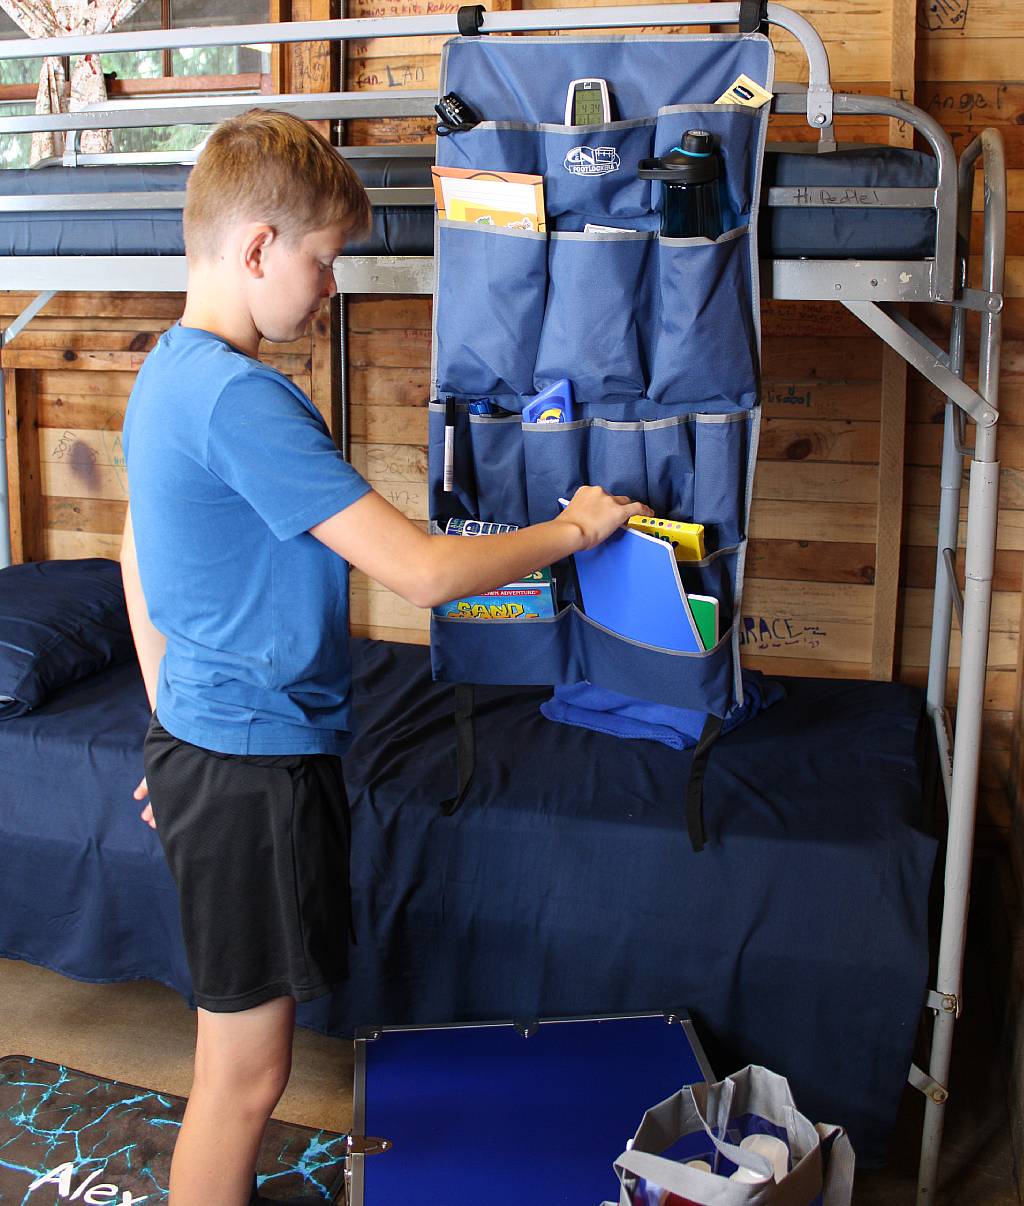 This camper can quickly find daily essentials in his Bunk Organizer!